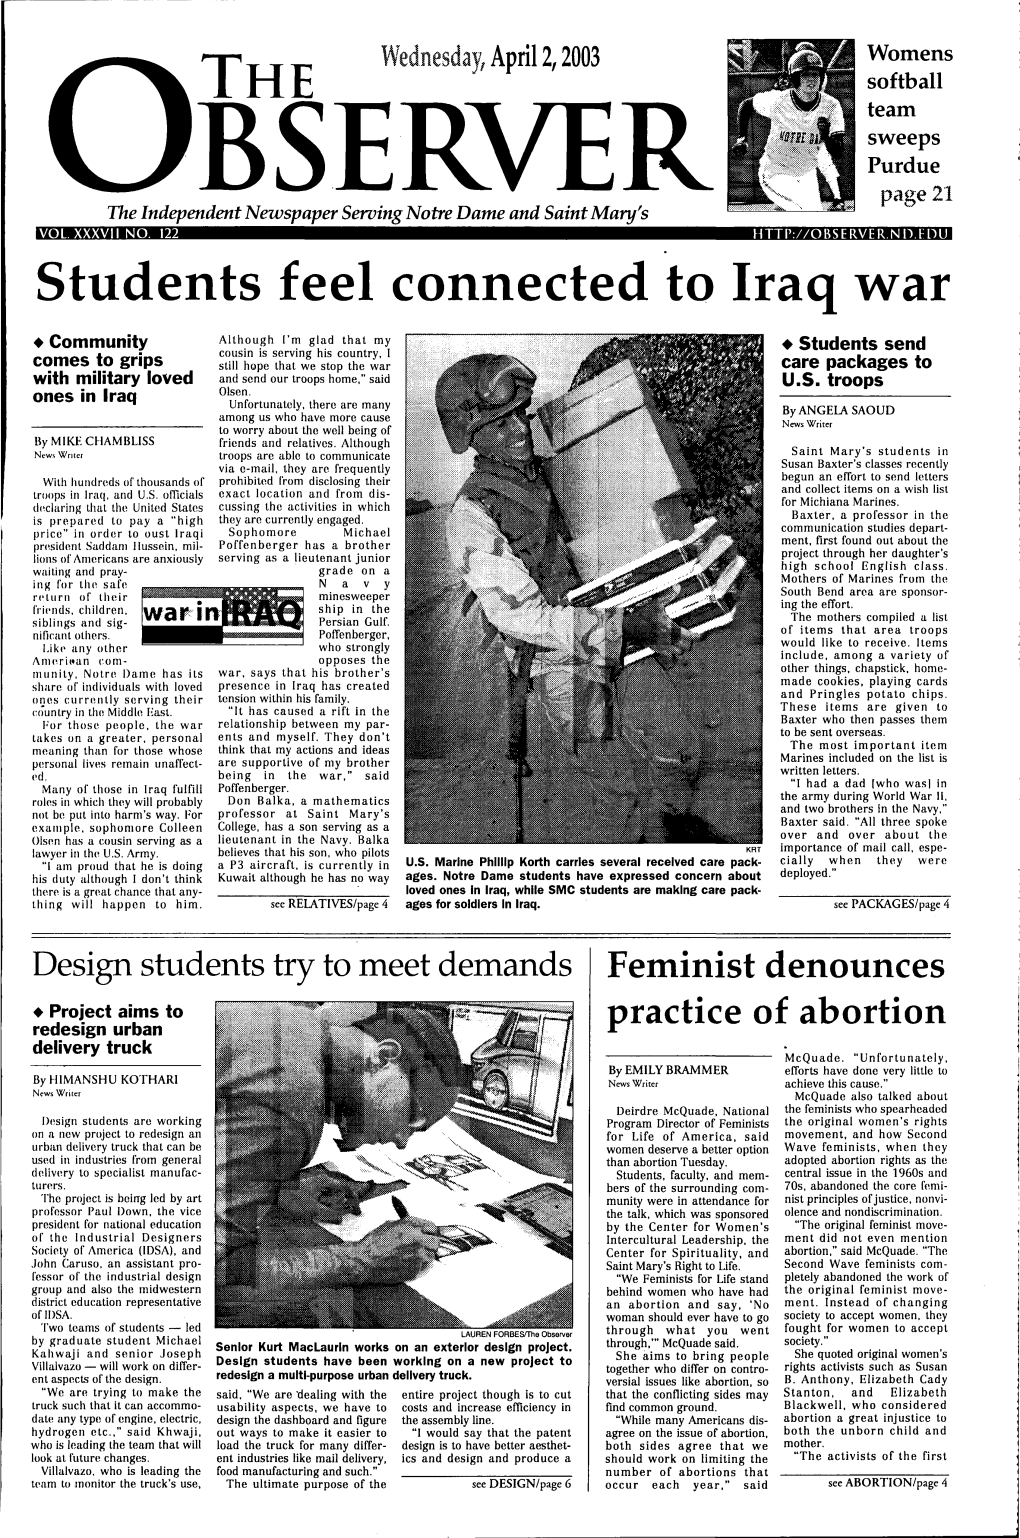 Students Feel Connected to Iraq War